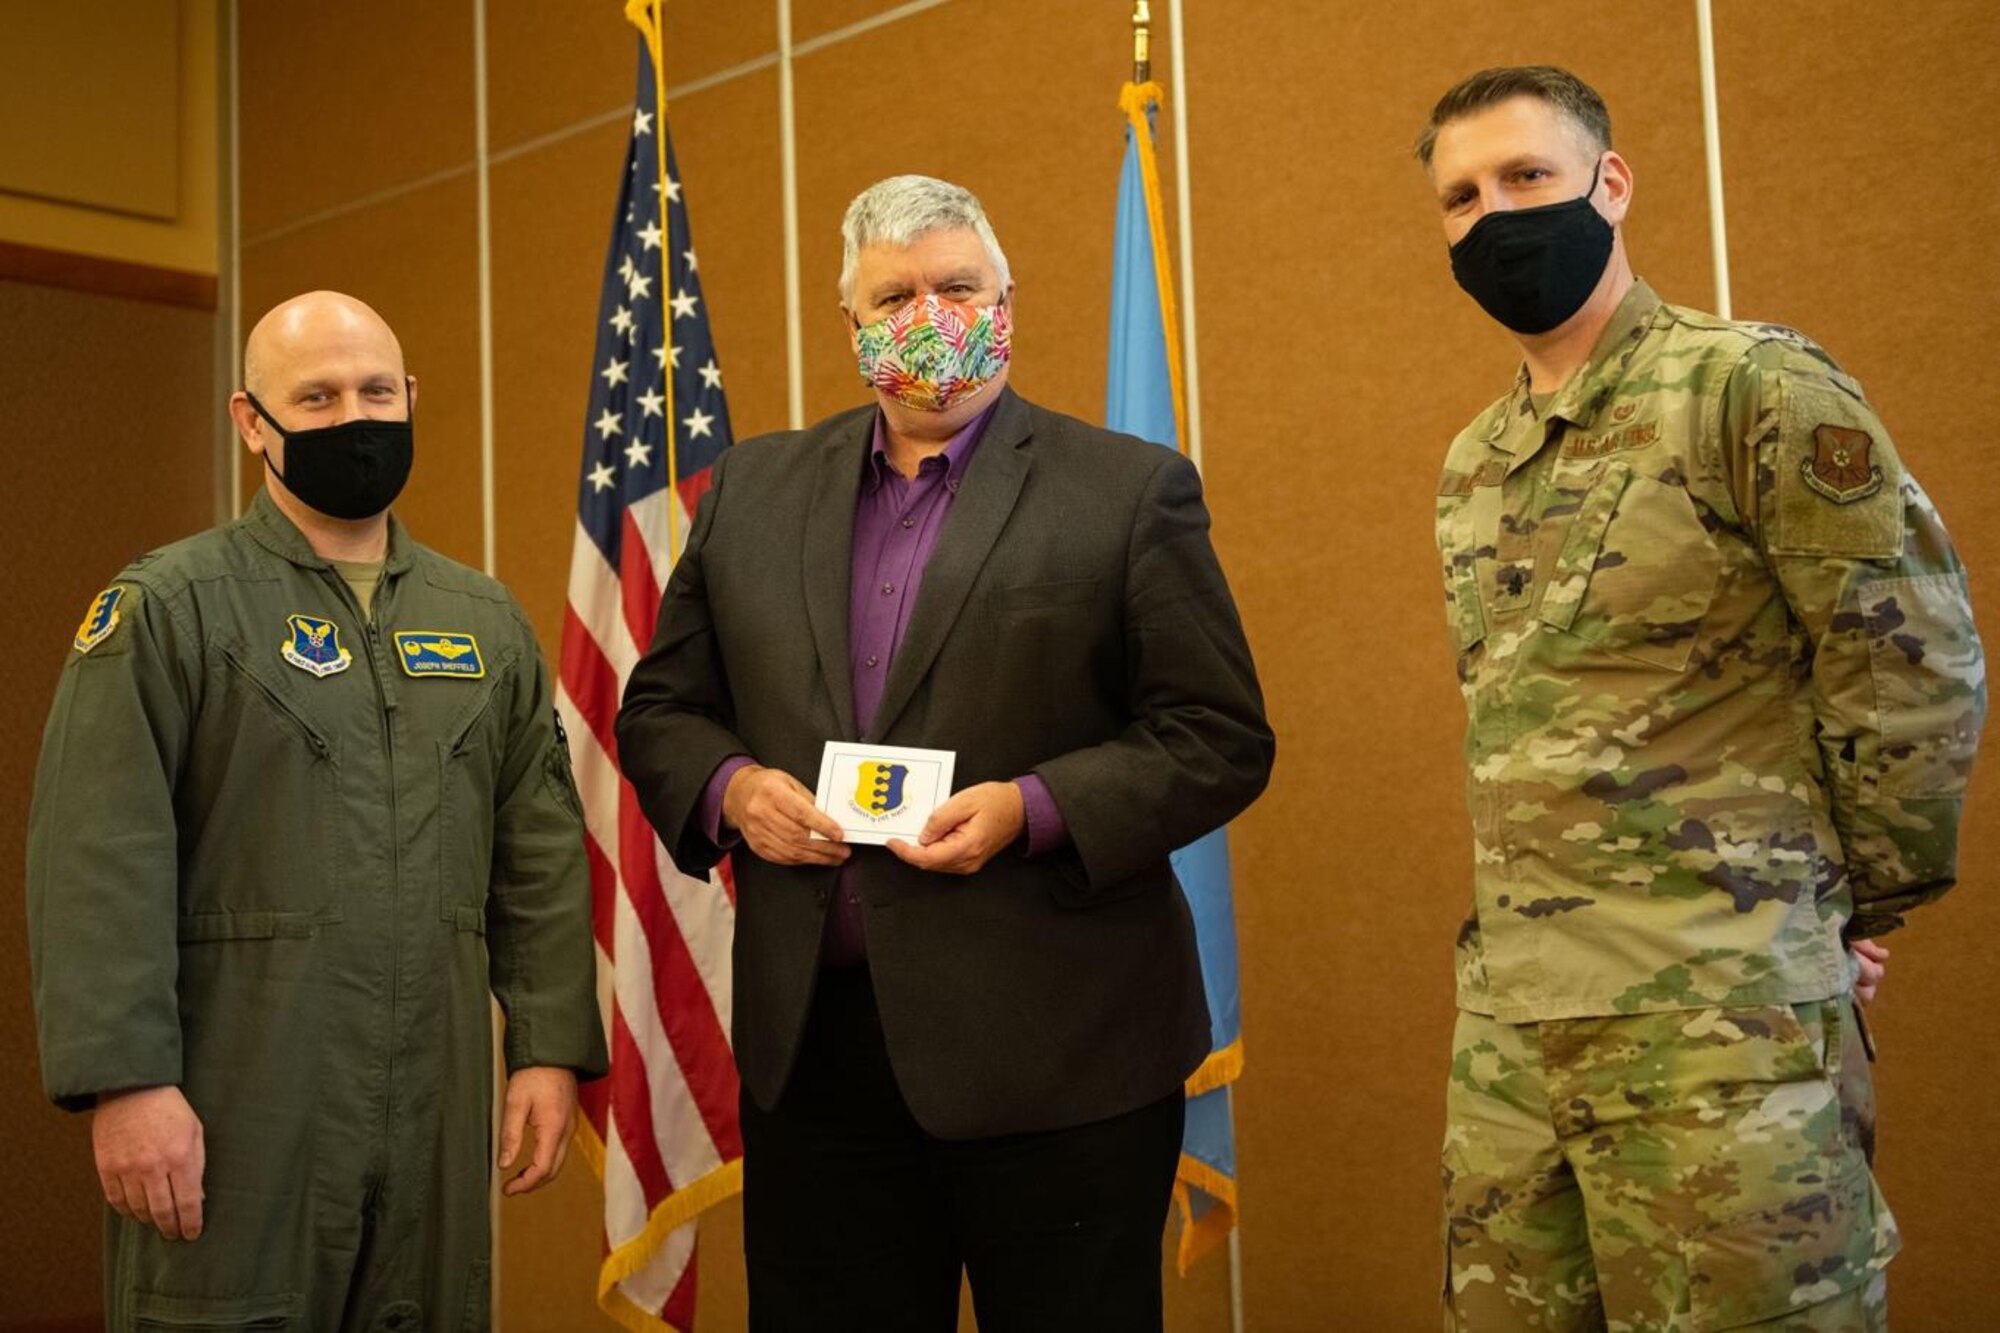 Col. Joseph Sheffield, 28th Bomb Wing commander (left), and Lt. Col. Samuel Miller, 28th Bomb Wing Judge Advocate (right), present Mark Vargo, Pennington County state’s attorney, with a lapel pin in recognition of being selected as the incoming honorary commander for the 28th BW/JA office during a special hail and farewell ceremony at The Monument Convention Center in Rapid City, S.D., Jan. 19, 2022.